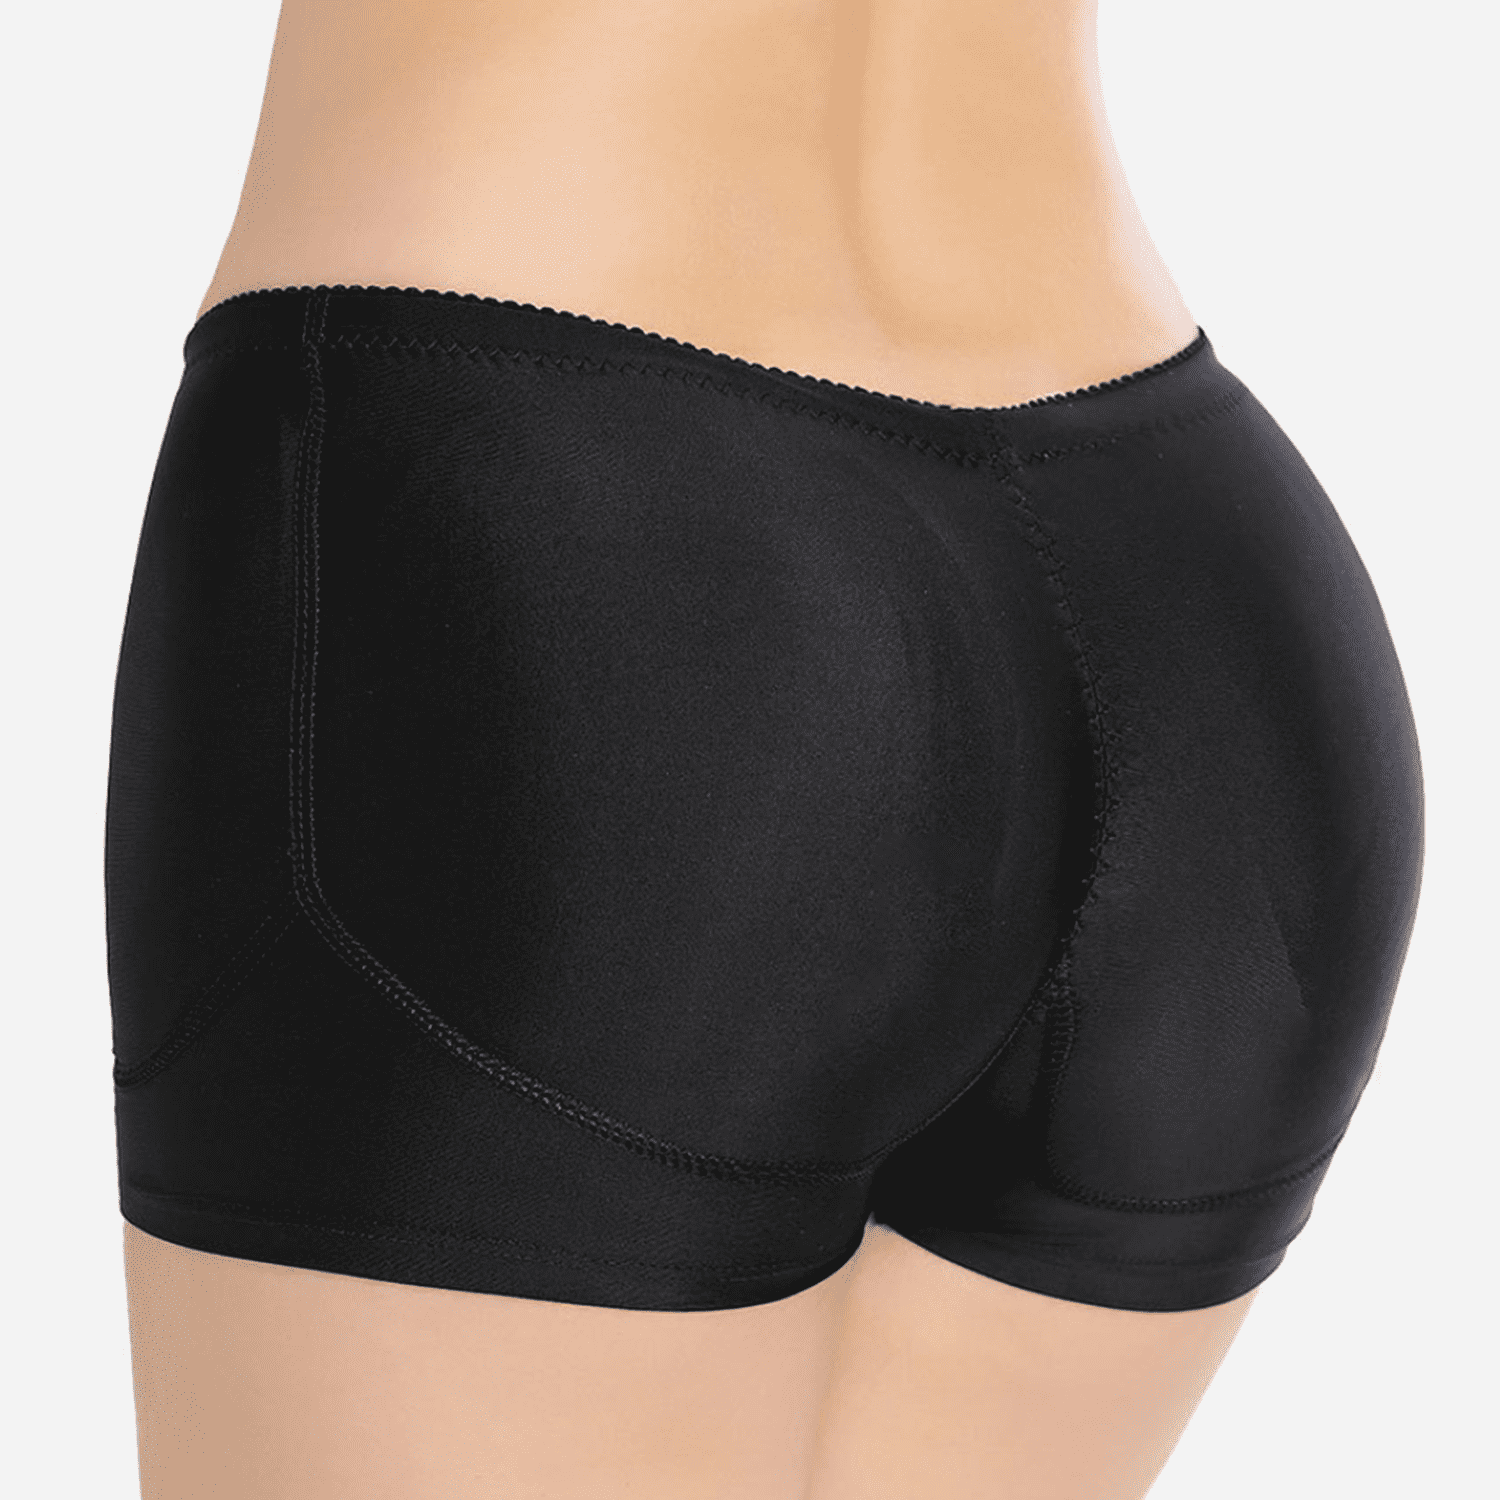 Homgro Women's Padded Hip Enhancer Removable Butt Pads Butt and Thigh  Lifter Shapewear Body Shaper Shorts Underwear Booty Lifting Black 18 